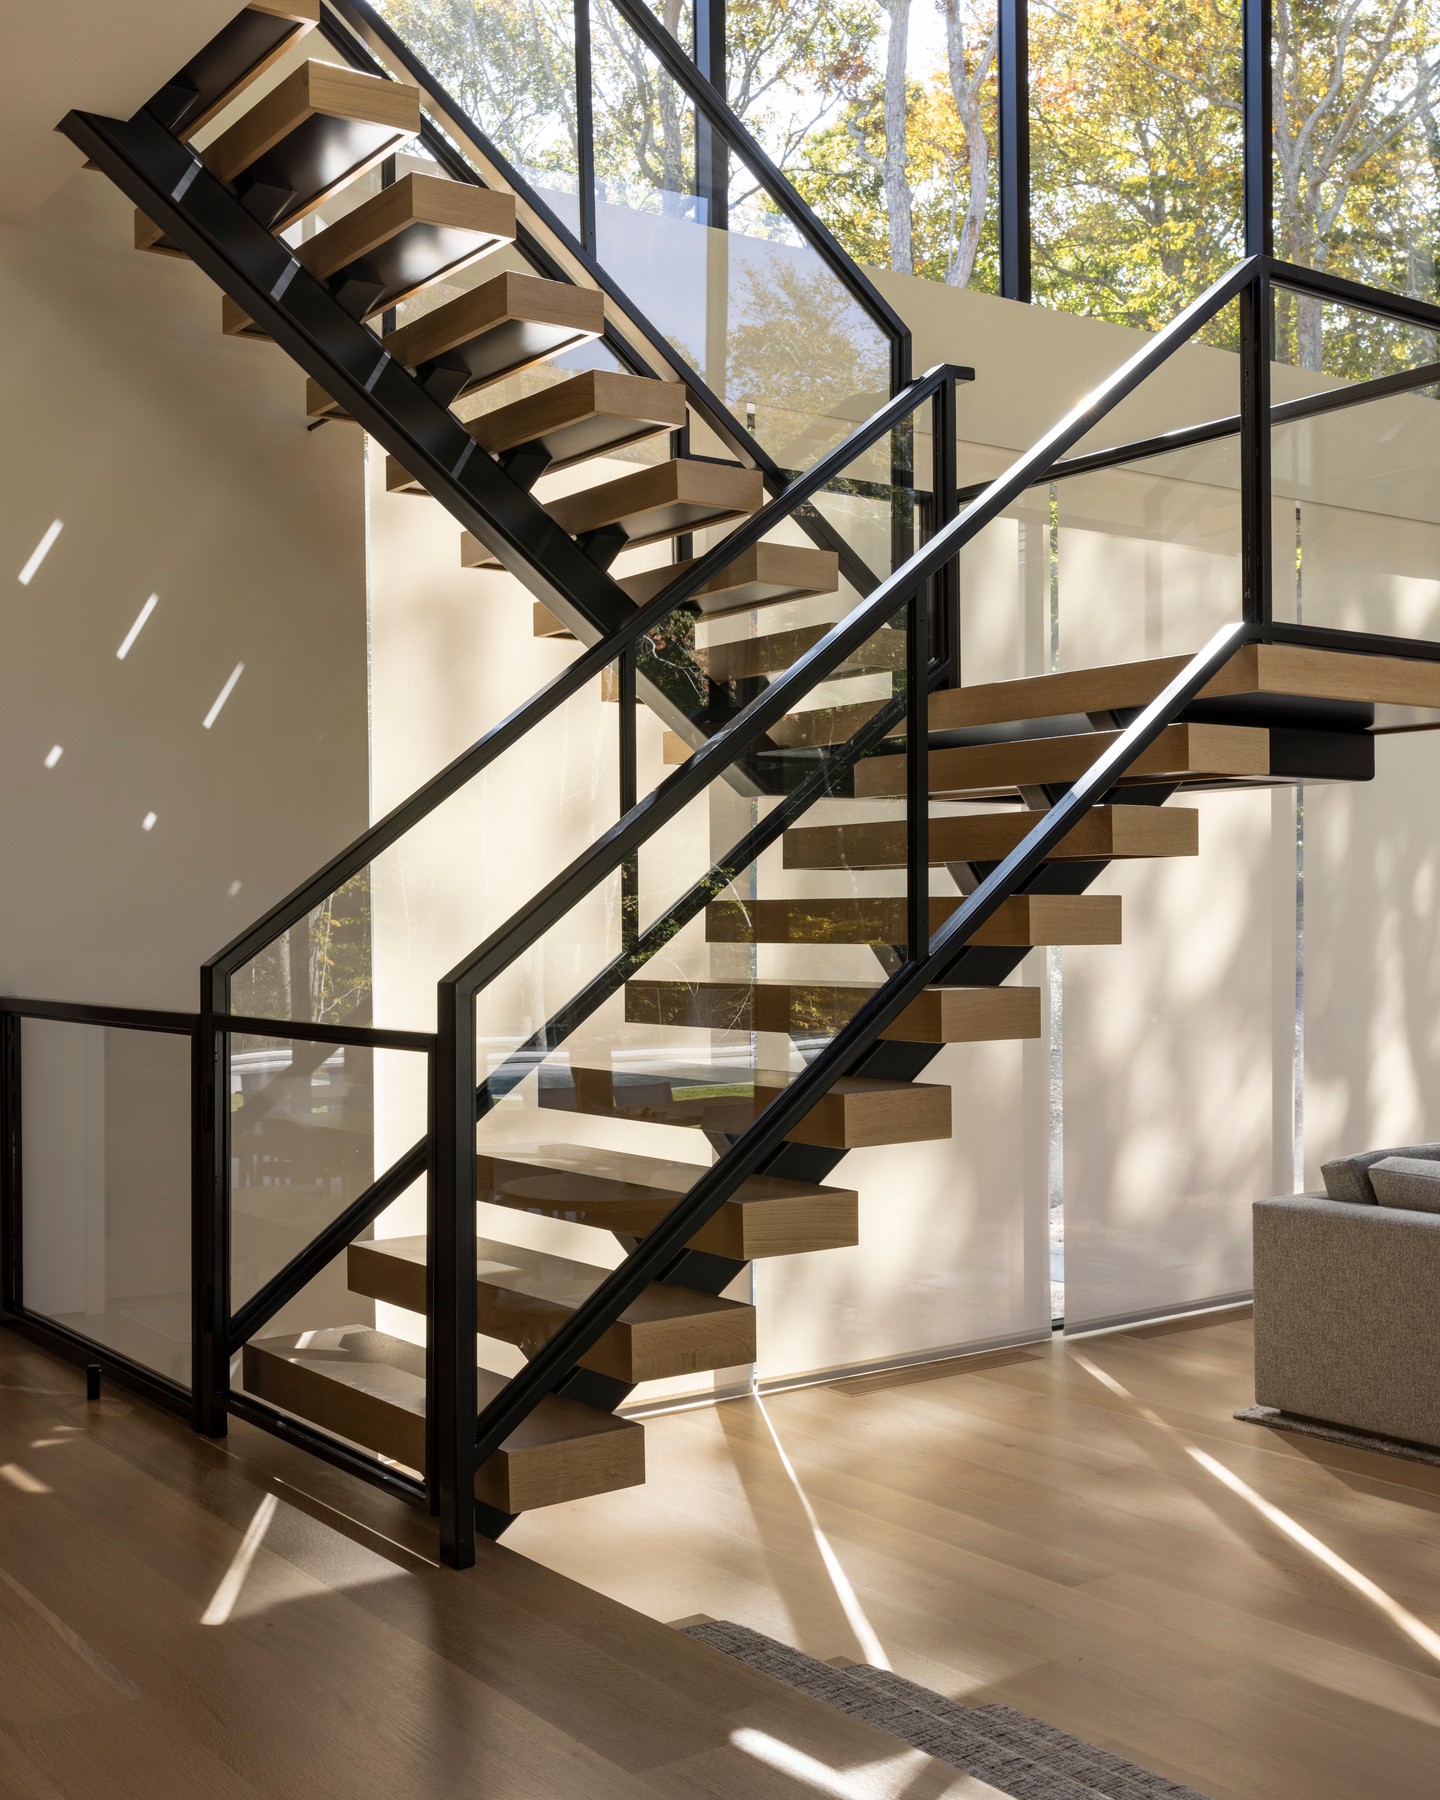 Very grateful for such wonderful clients that wanted to go all the way with these floating stairs!

Photography by @musnicki_photography 
Interiors by @tarakantorinteriors 

#floatingstairs #stairs #marvinwindows #hamptons #amagansett #architecture #architecturephotography #architect #thehamptons #house #housegoals